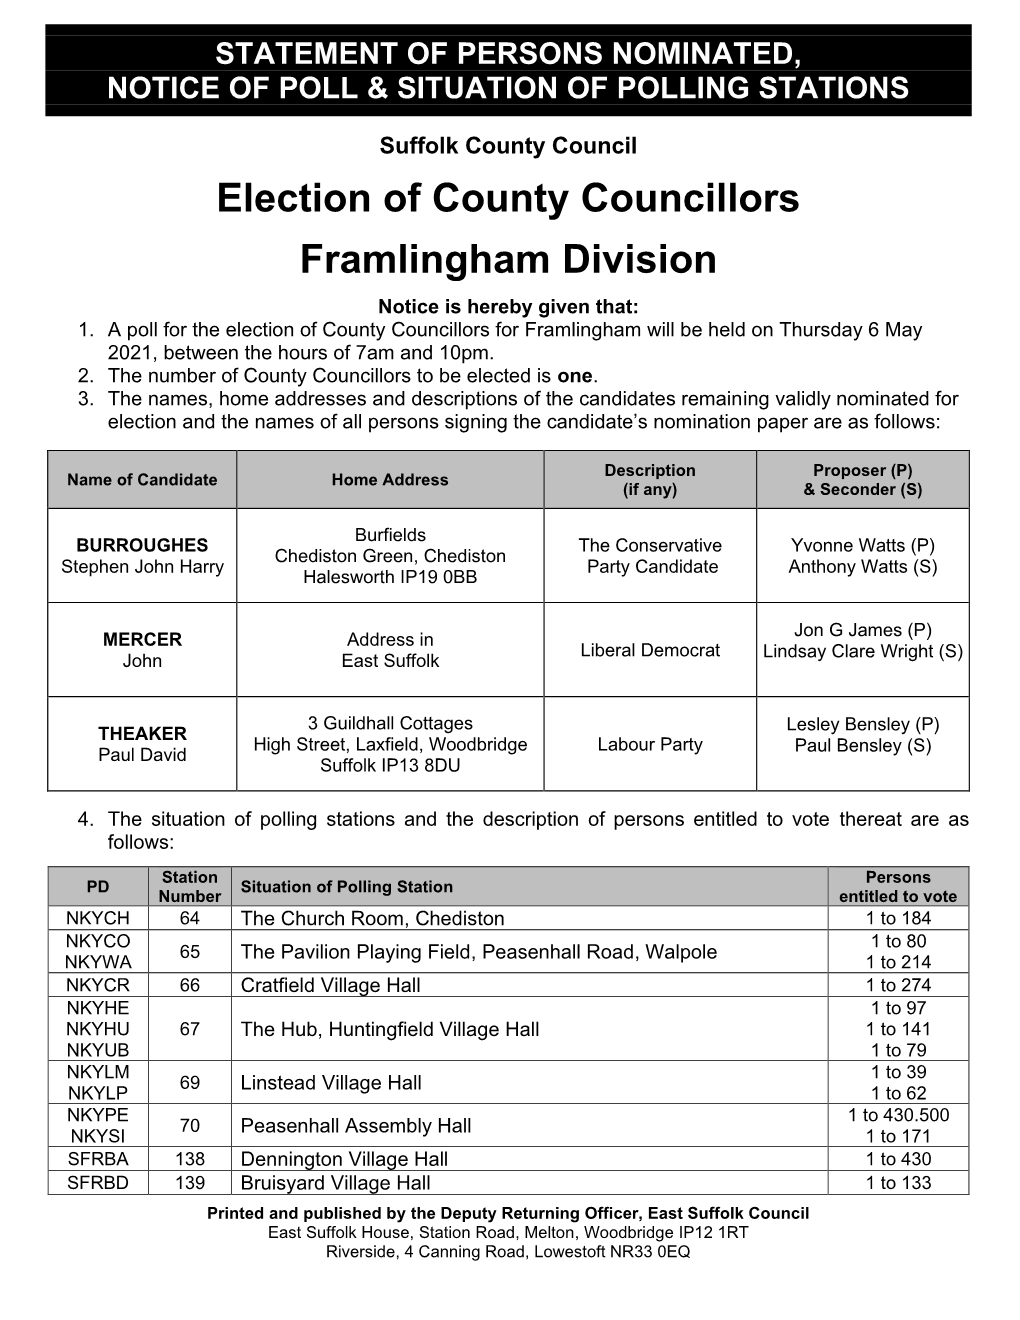 Election of County Councillors Framlingham Division